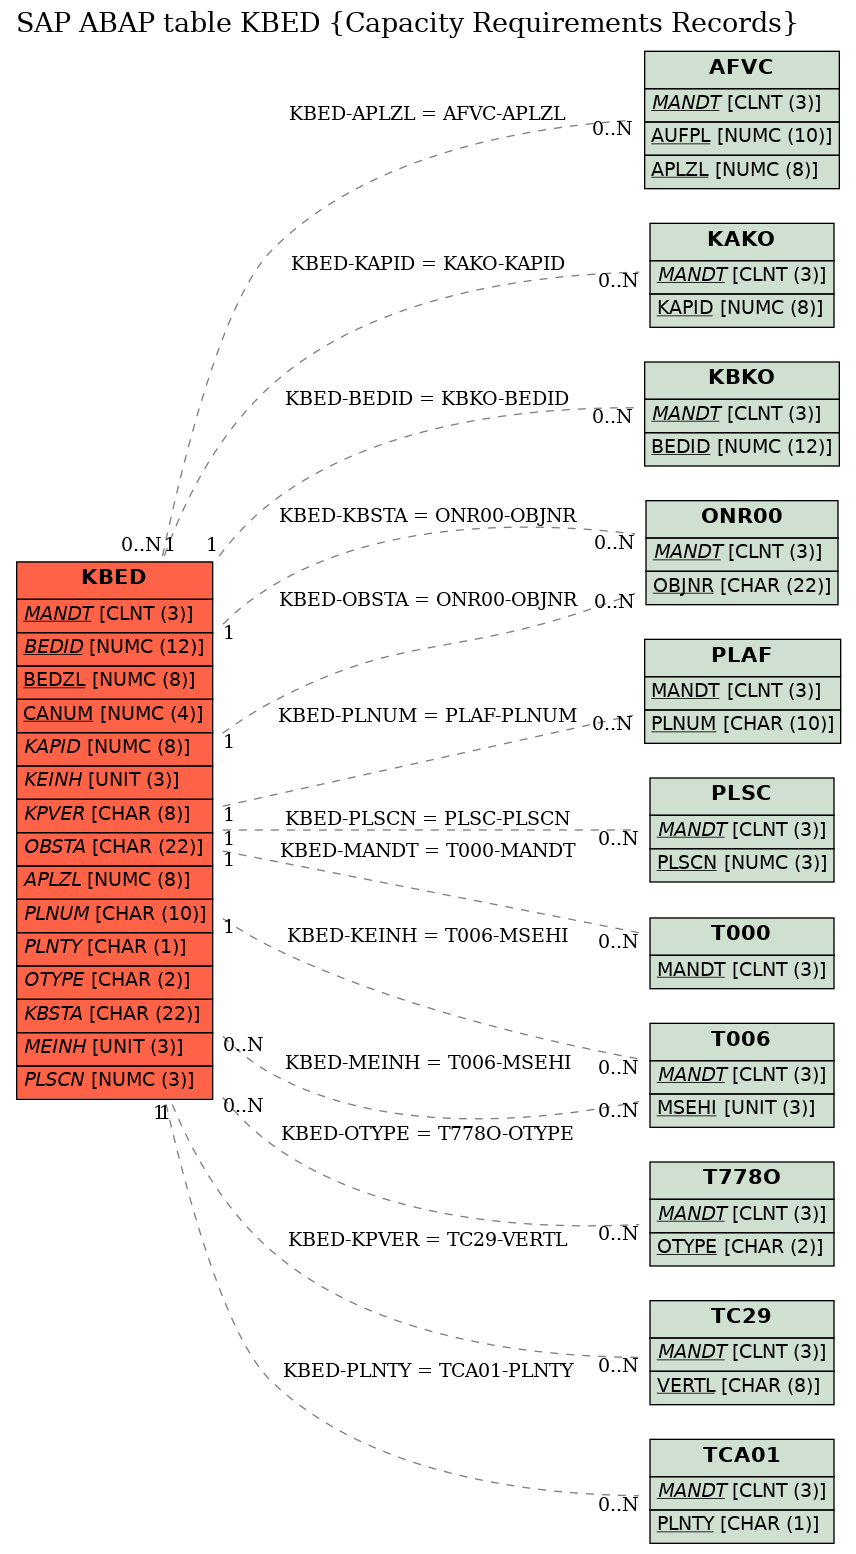 E-R Diagram for table KBED (Capacity Requirements Records)